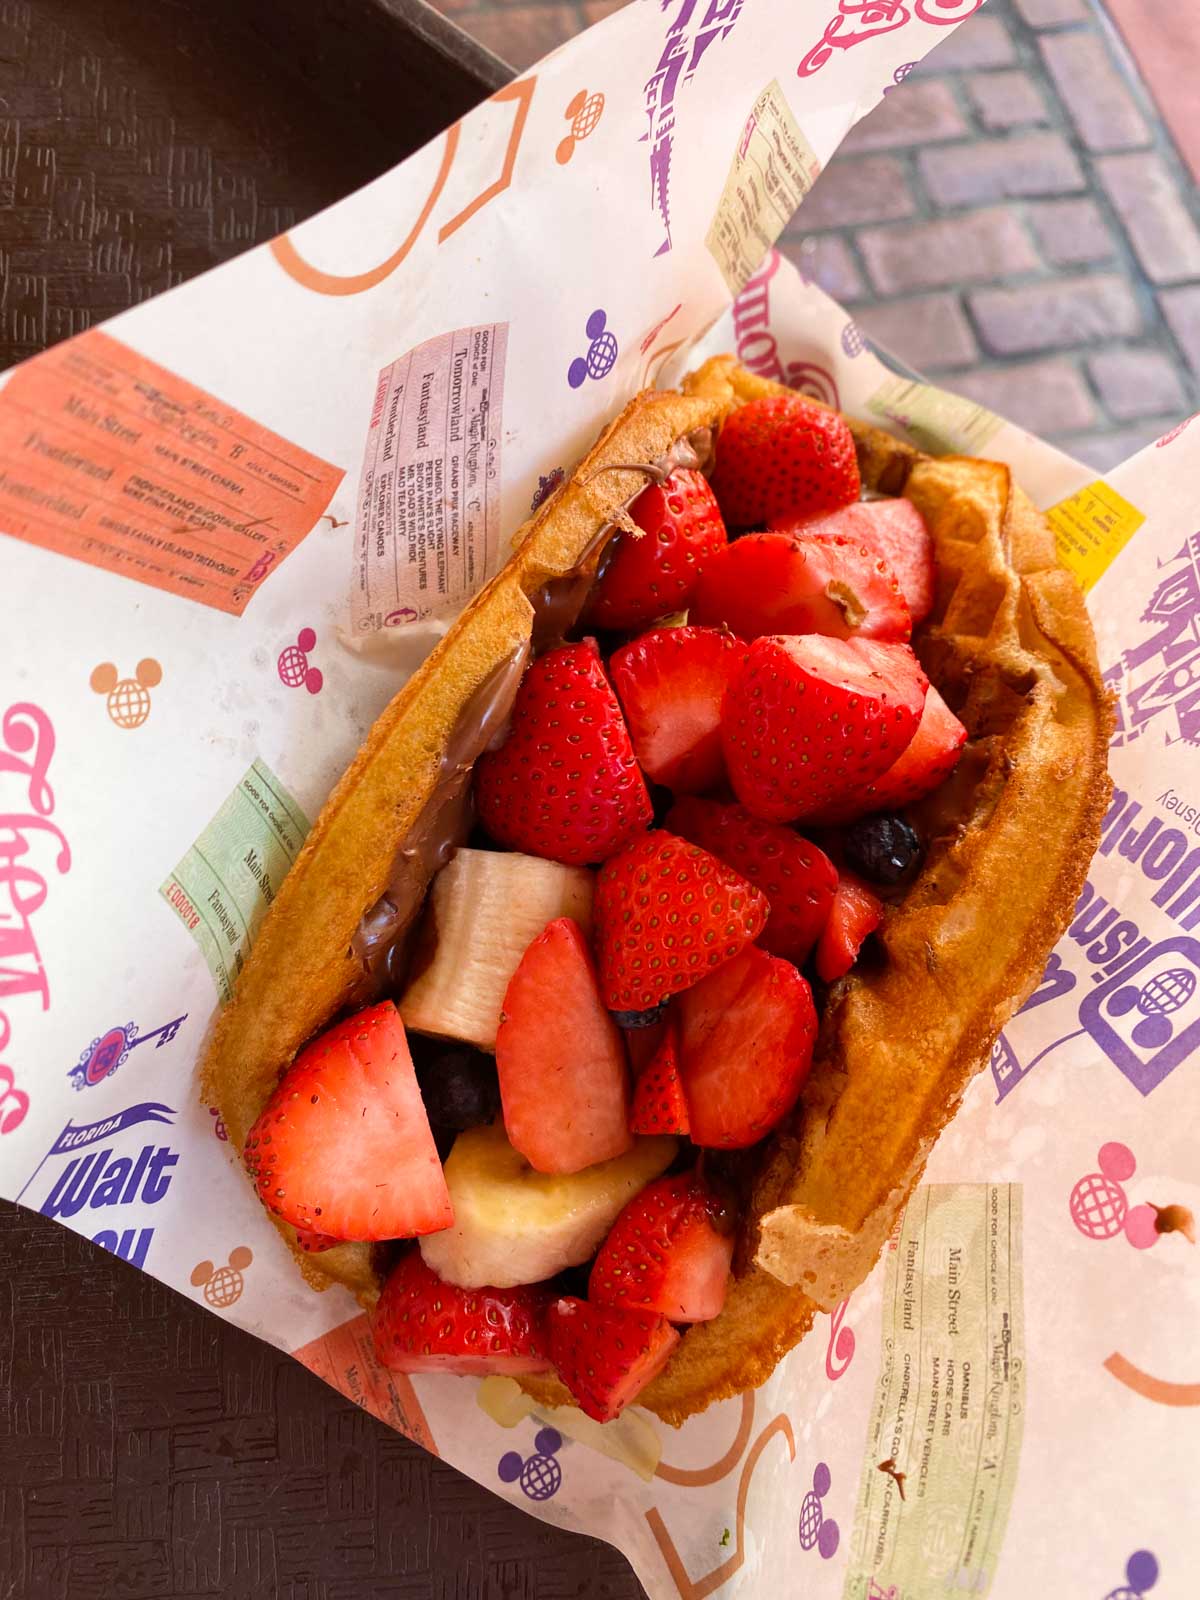 A waffle spread with Nutella and fresh strawberries.